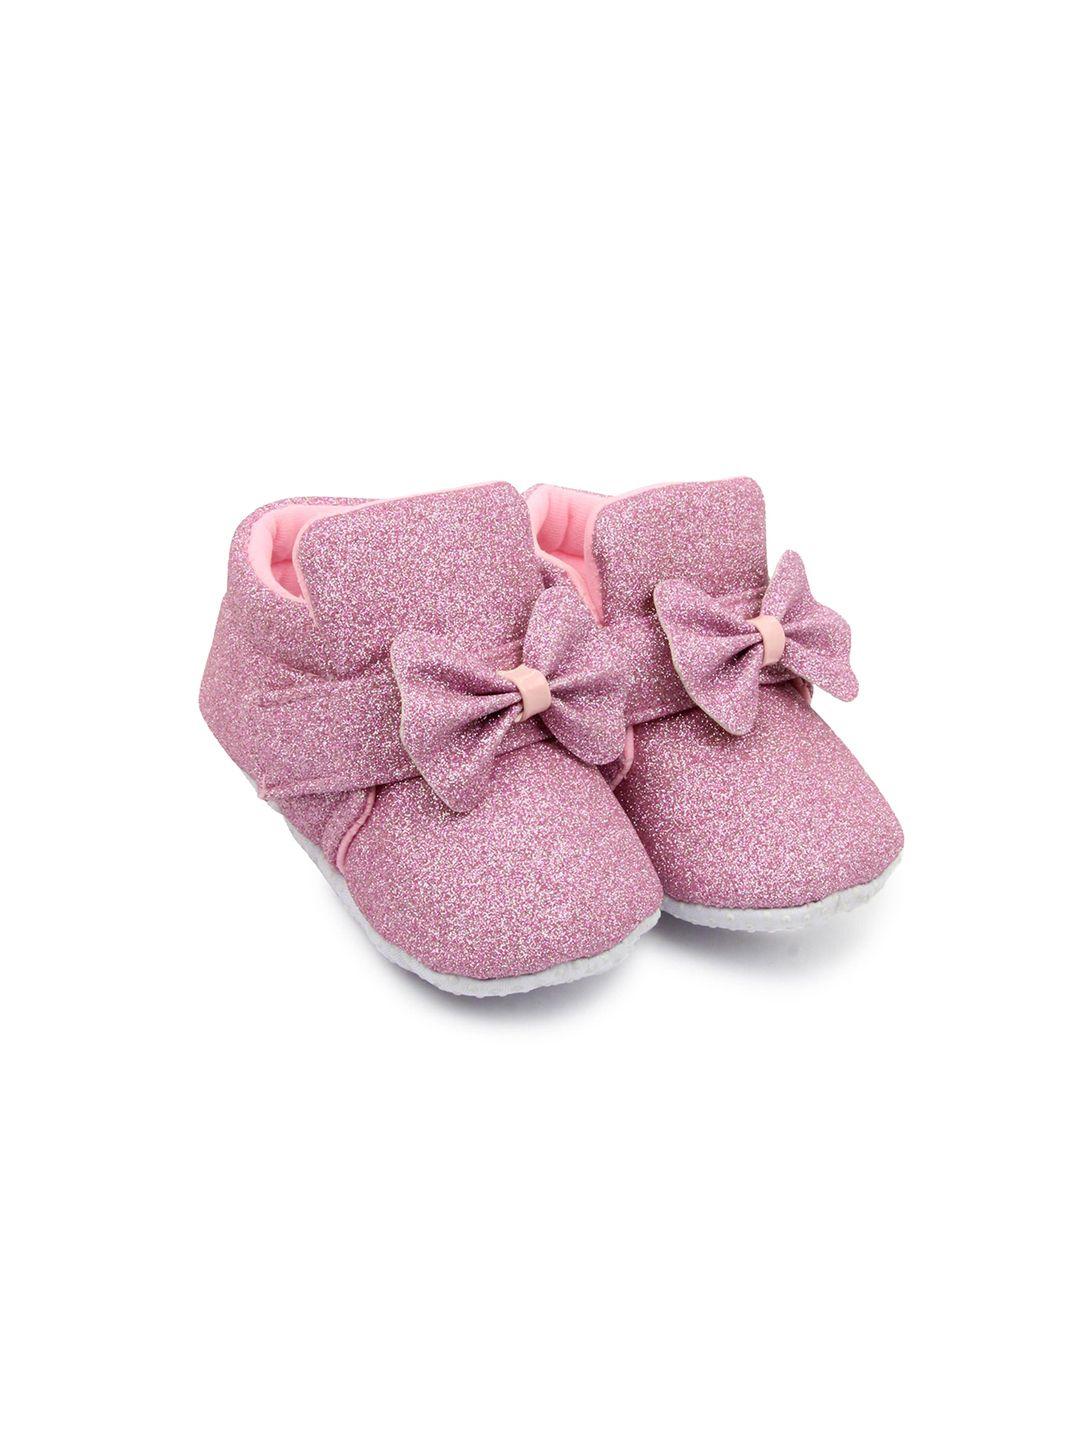 baesd infant girls embellished bow detail cotton booties